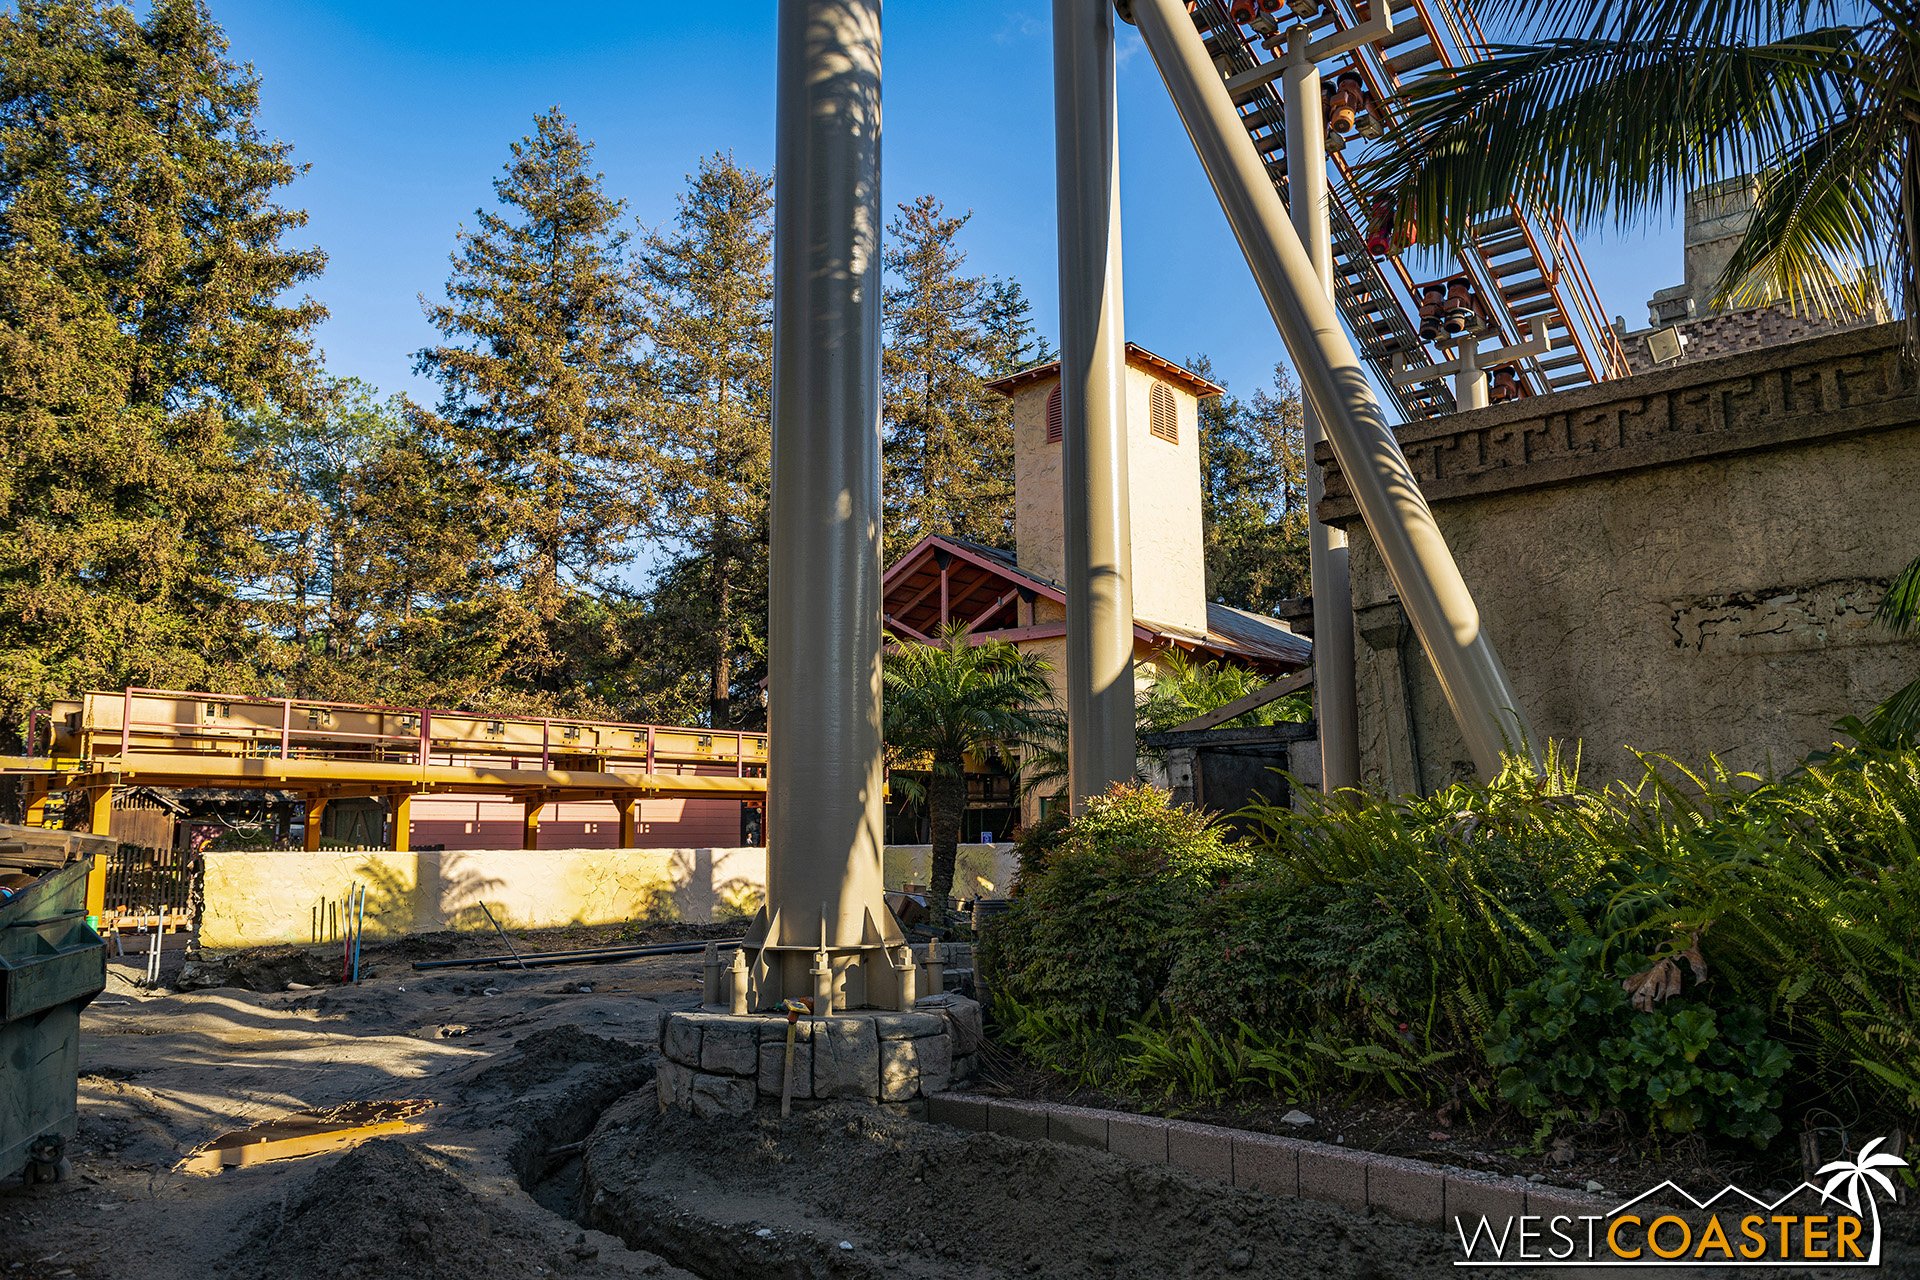  The ride building remains intact.  The new station for Montezooma is supposed to be a mysterious temple, suggesting that maybe the Jaguar station structure and Montezooma station structure could be combined (that’s just speculation), but we’ll see h